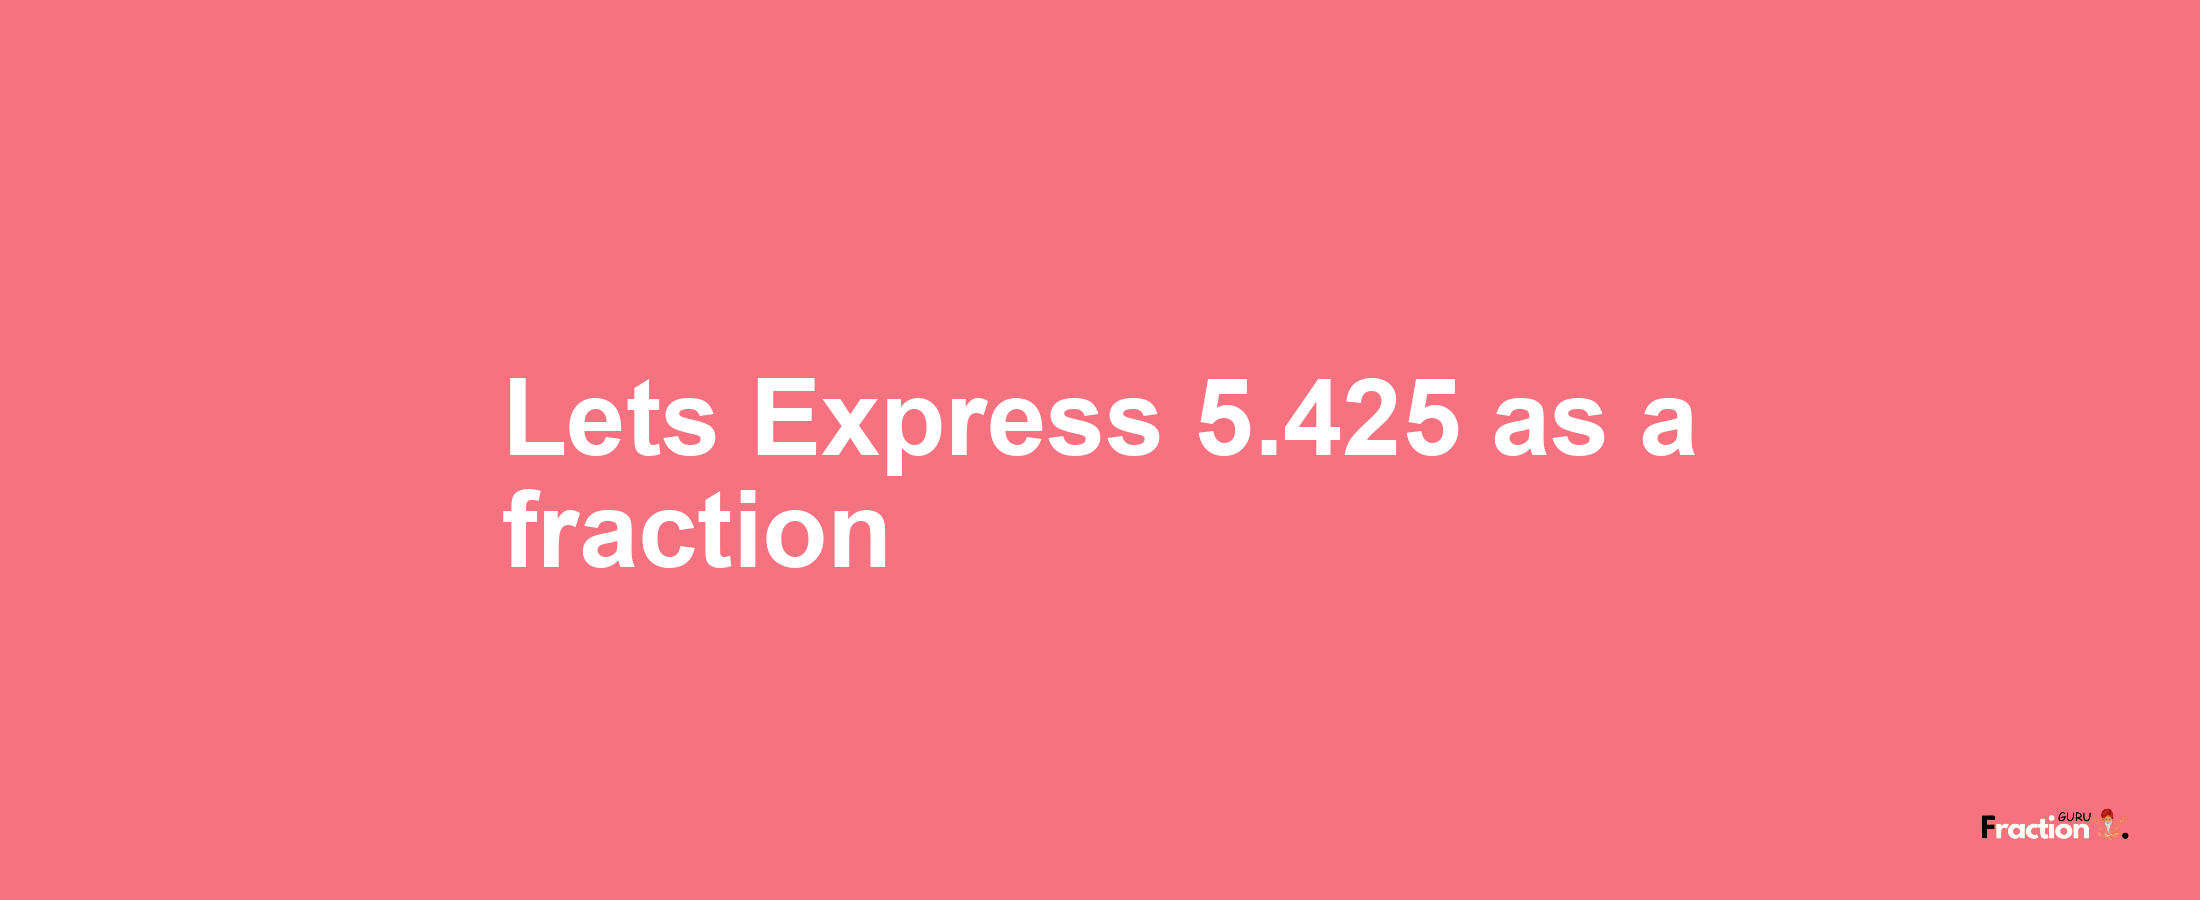 Lets Express 5.425 as afraction